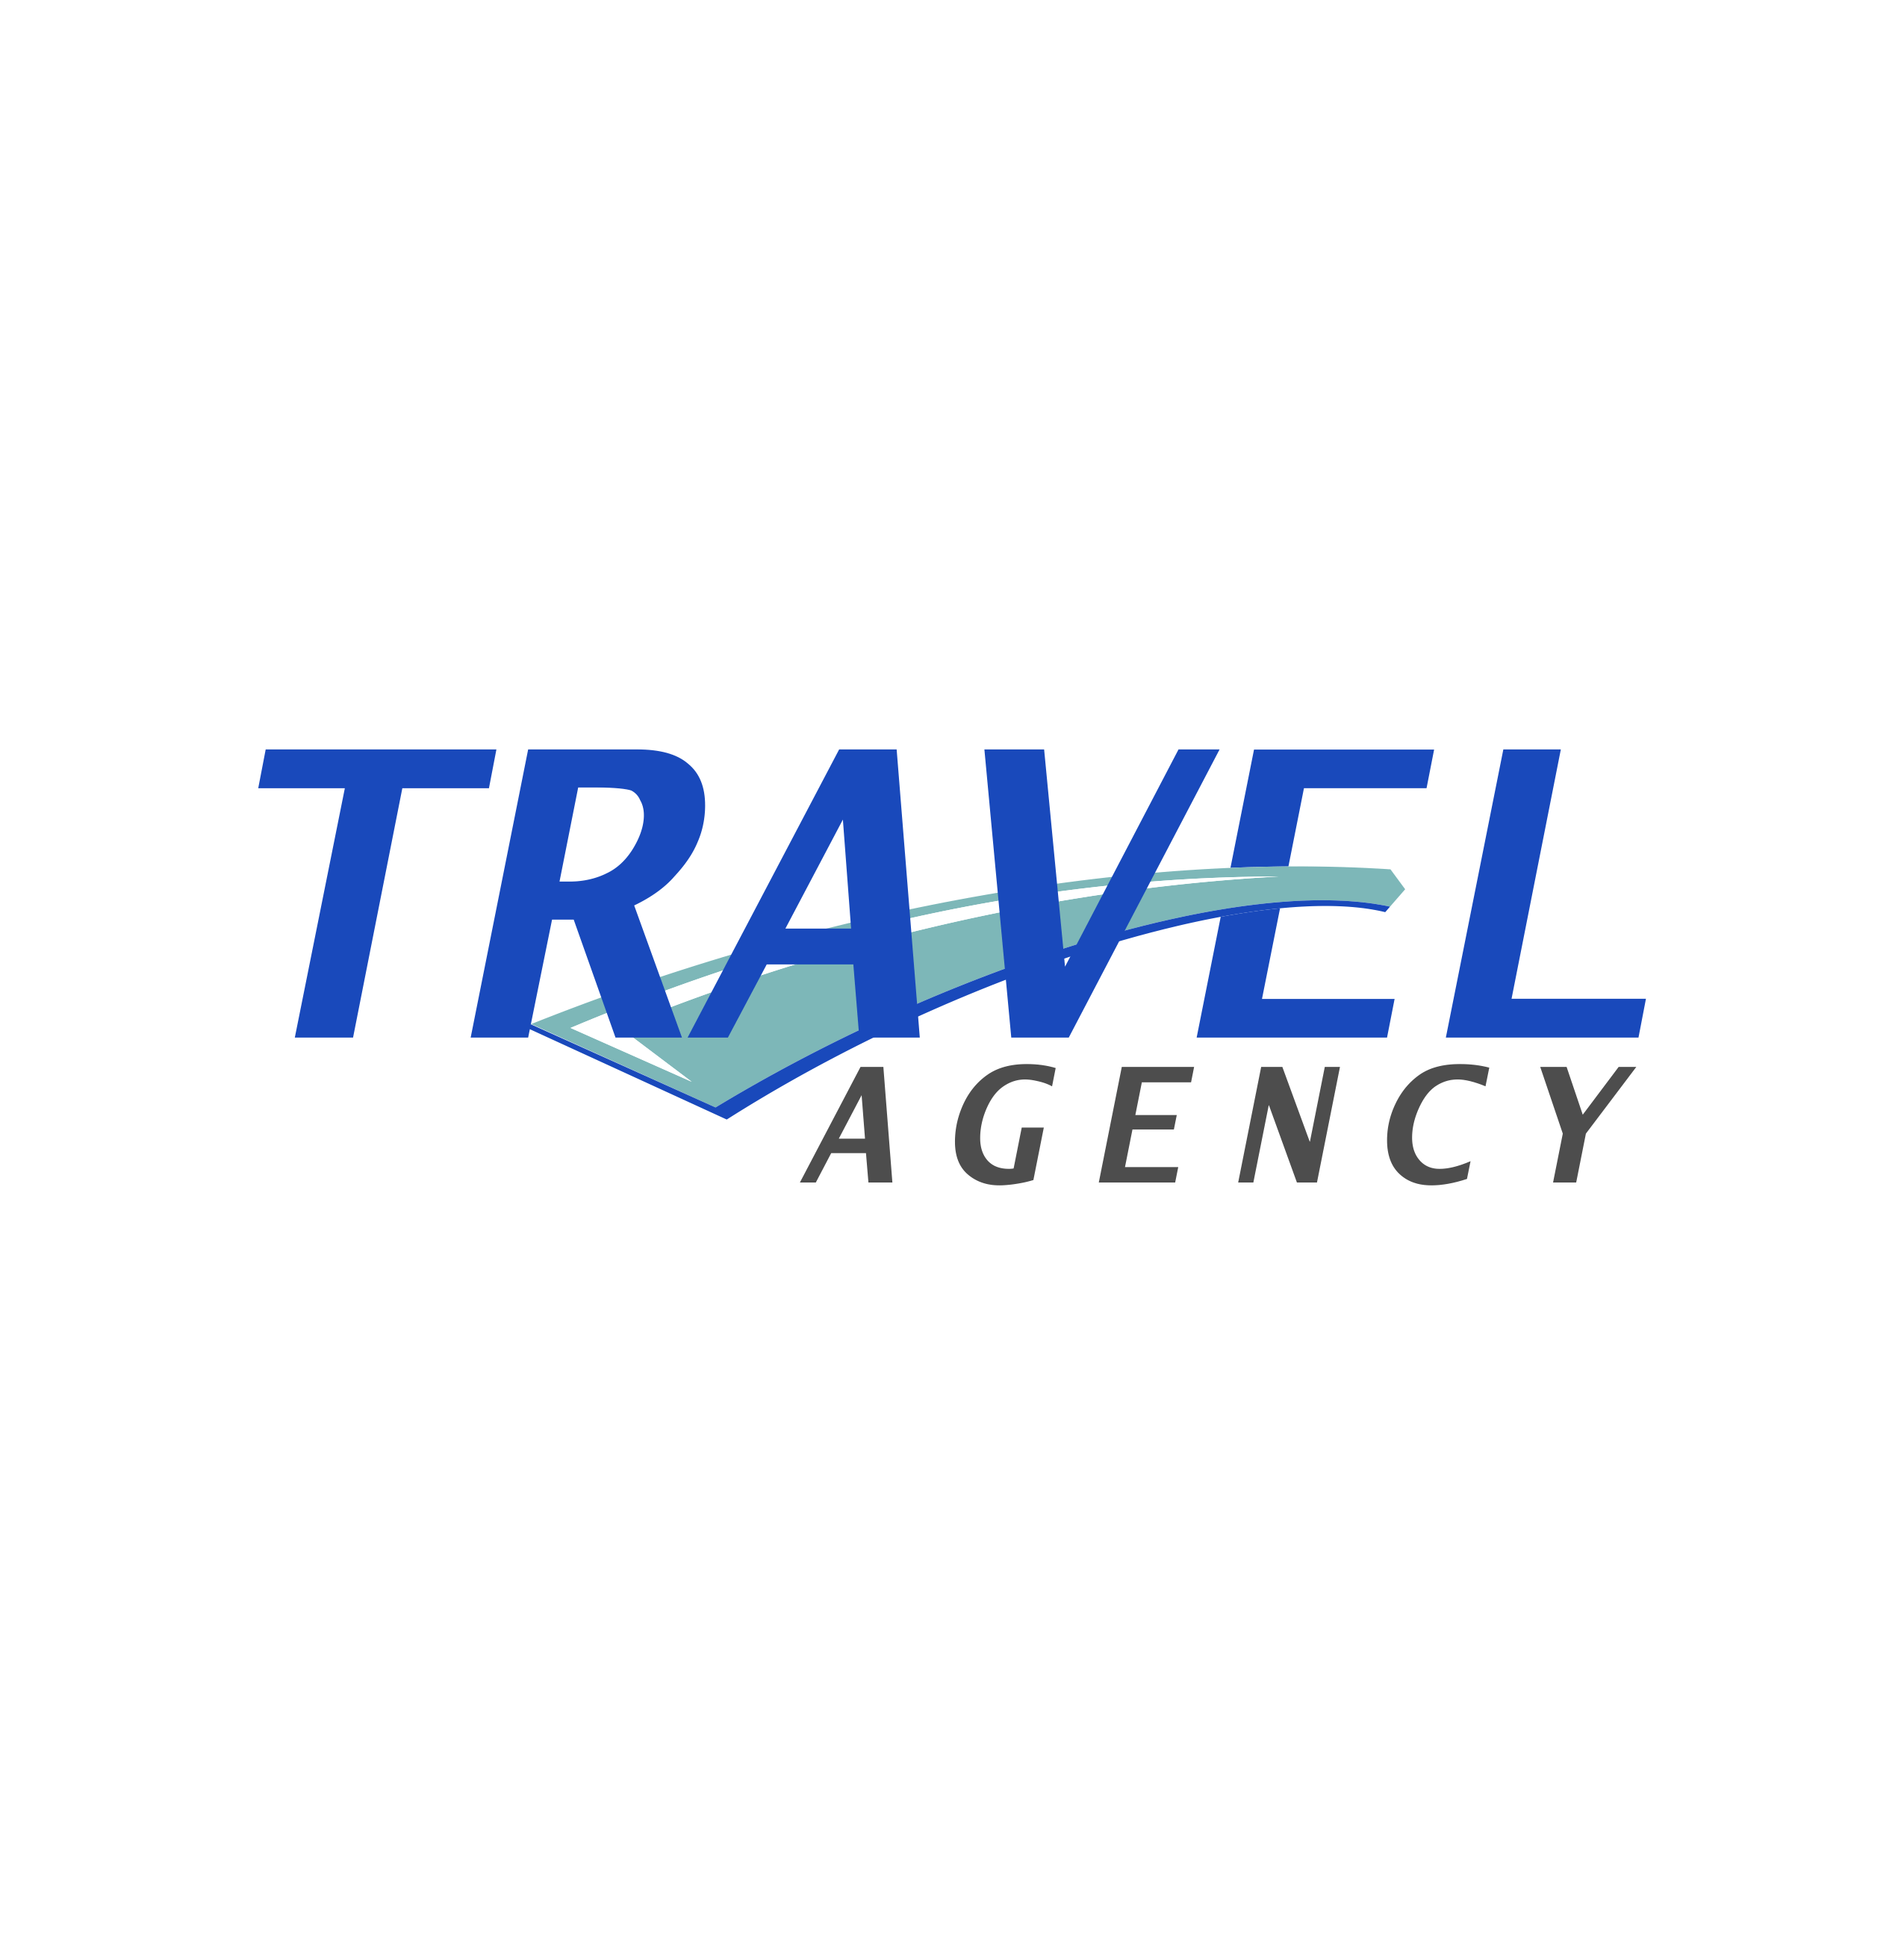 Logo Design Contest for Travel Agency | Hatchwise